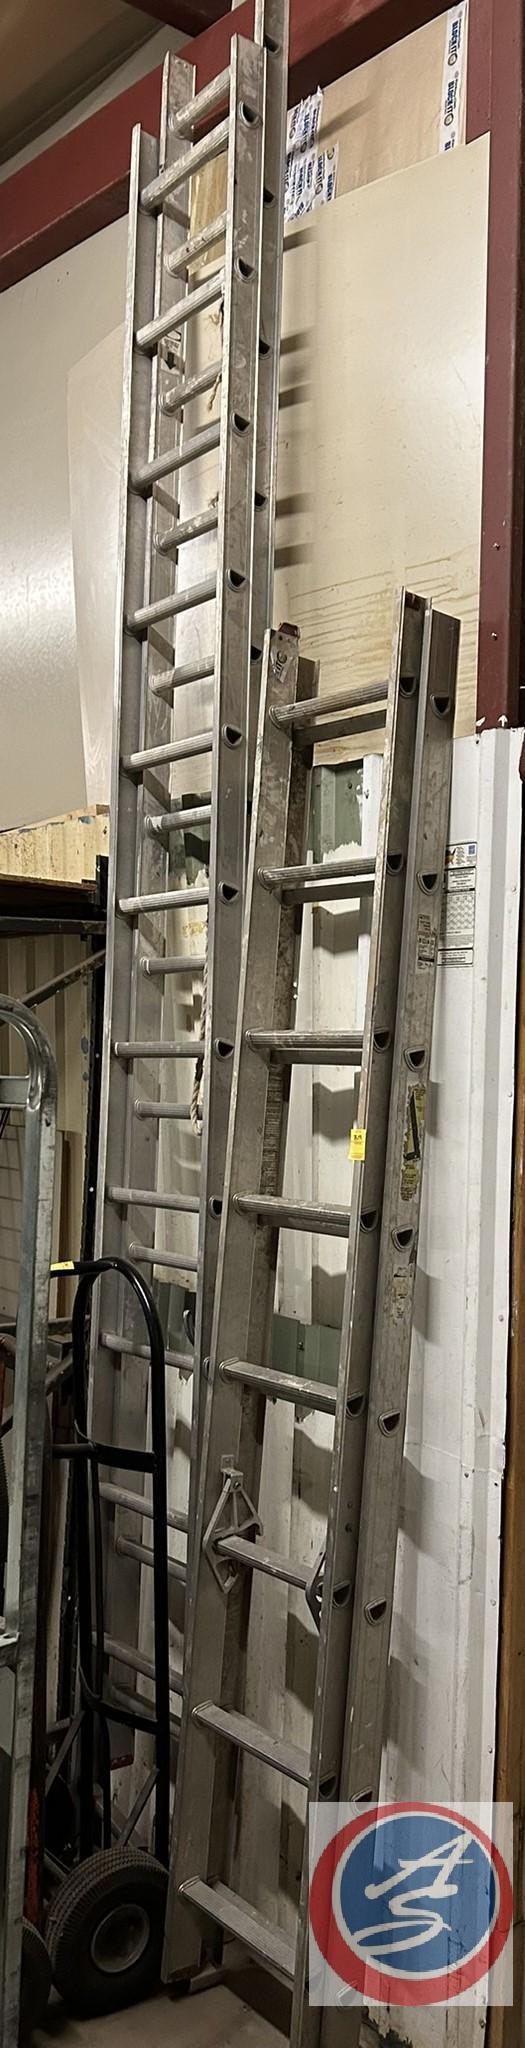 (2) extendable ladders